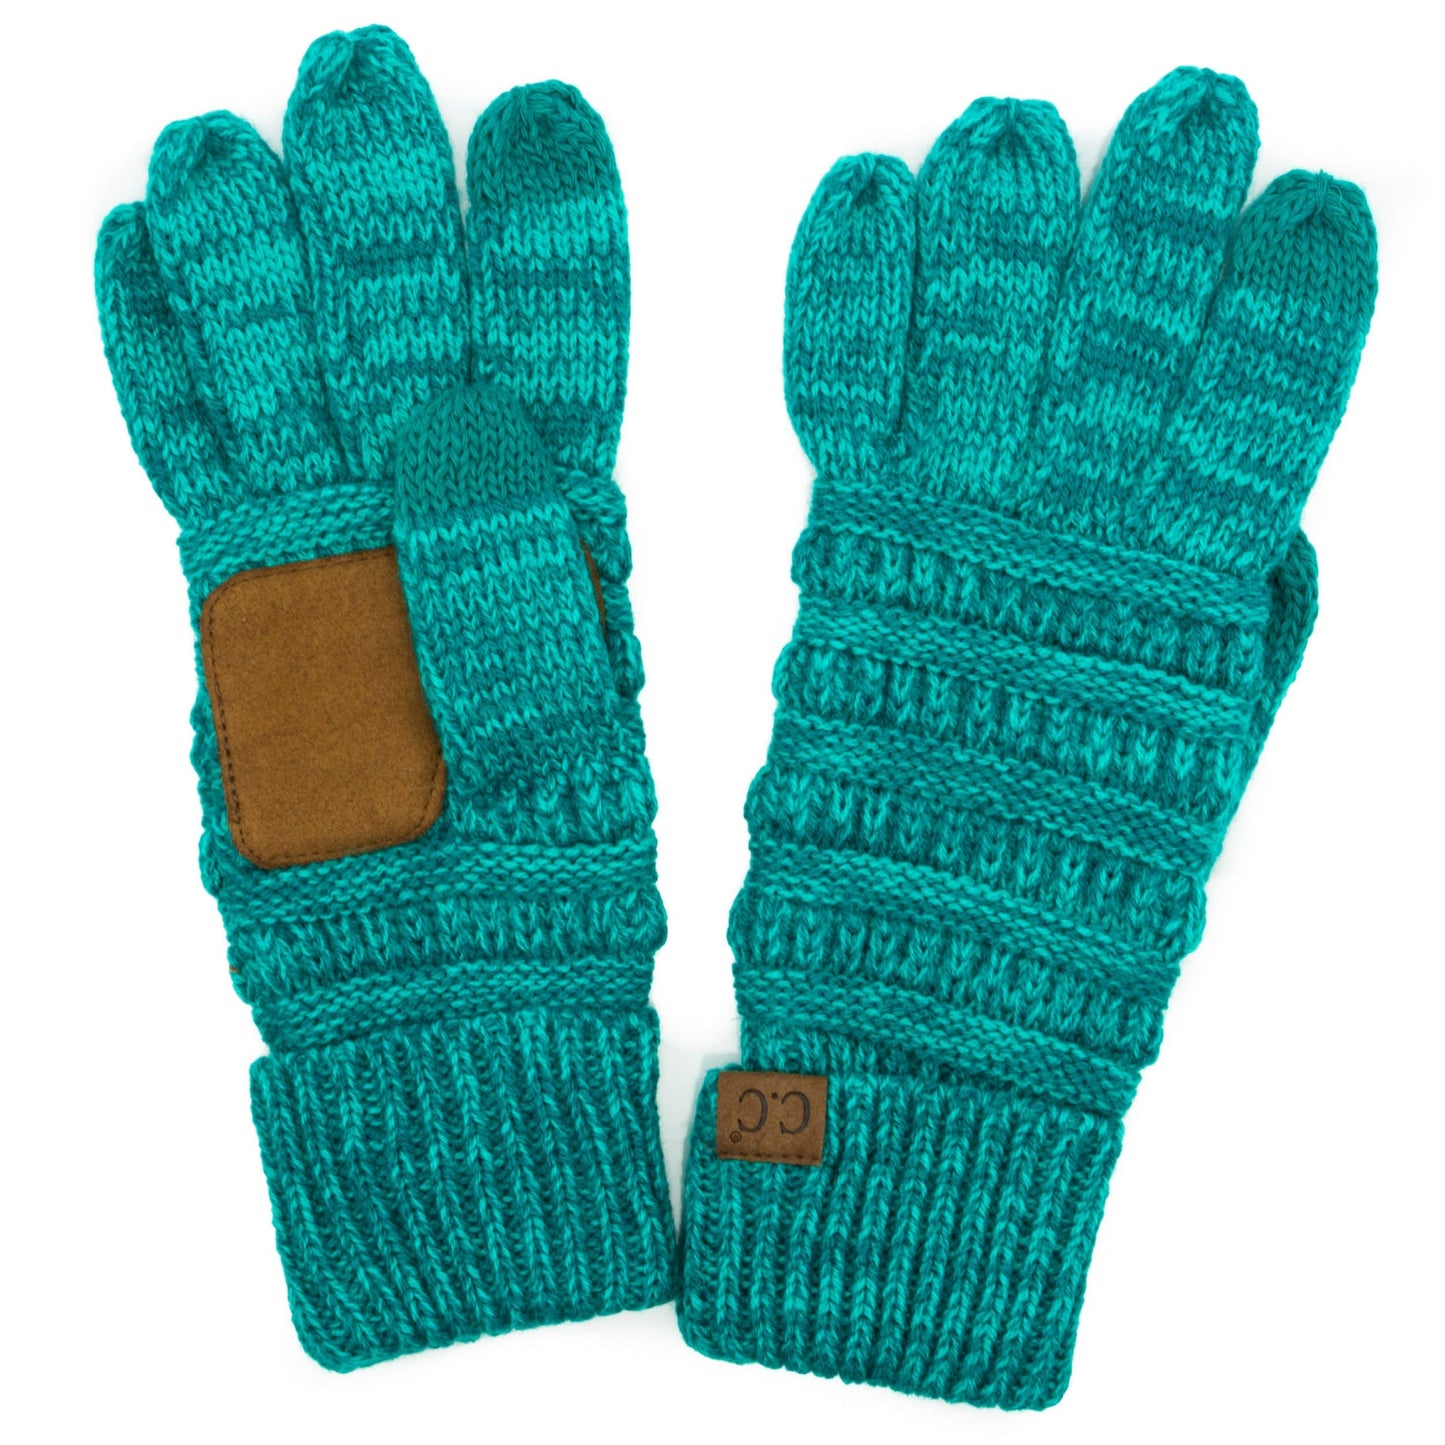 C.C Apparel Two Tone Mint C.C Unisex Cable Knit Winter Warm Anti-Slip Two-Toned Touchscreen Texting Gloves